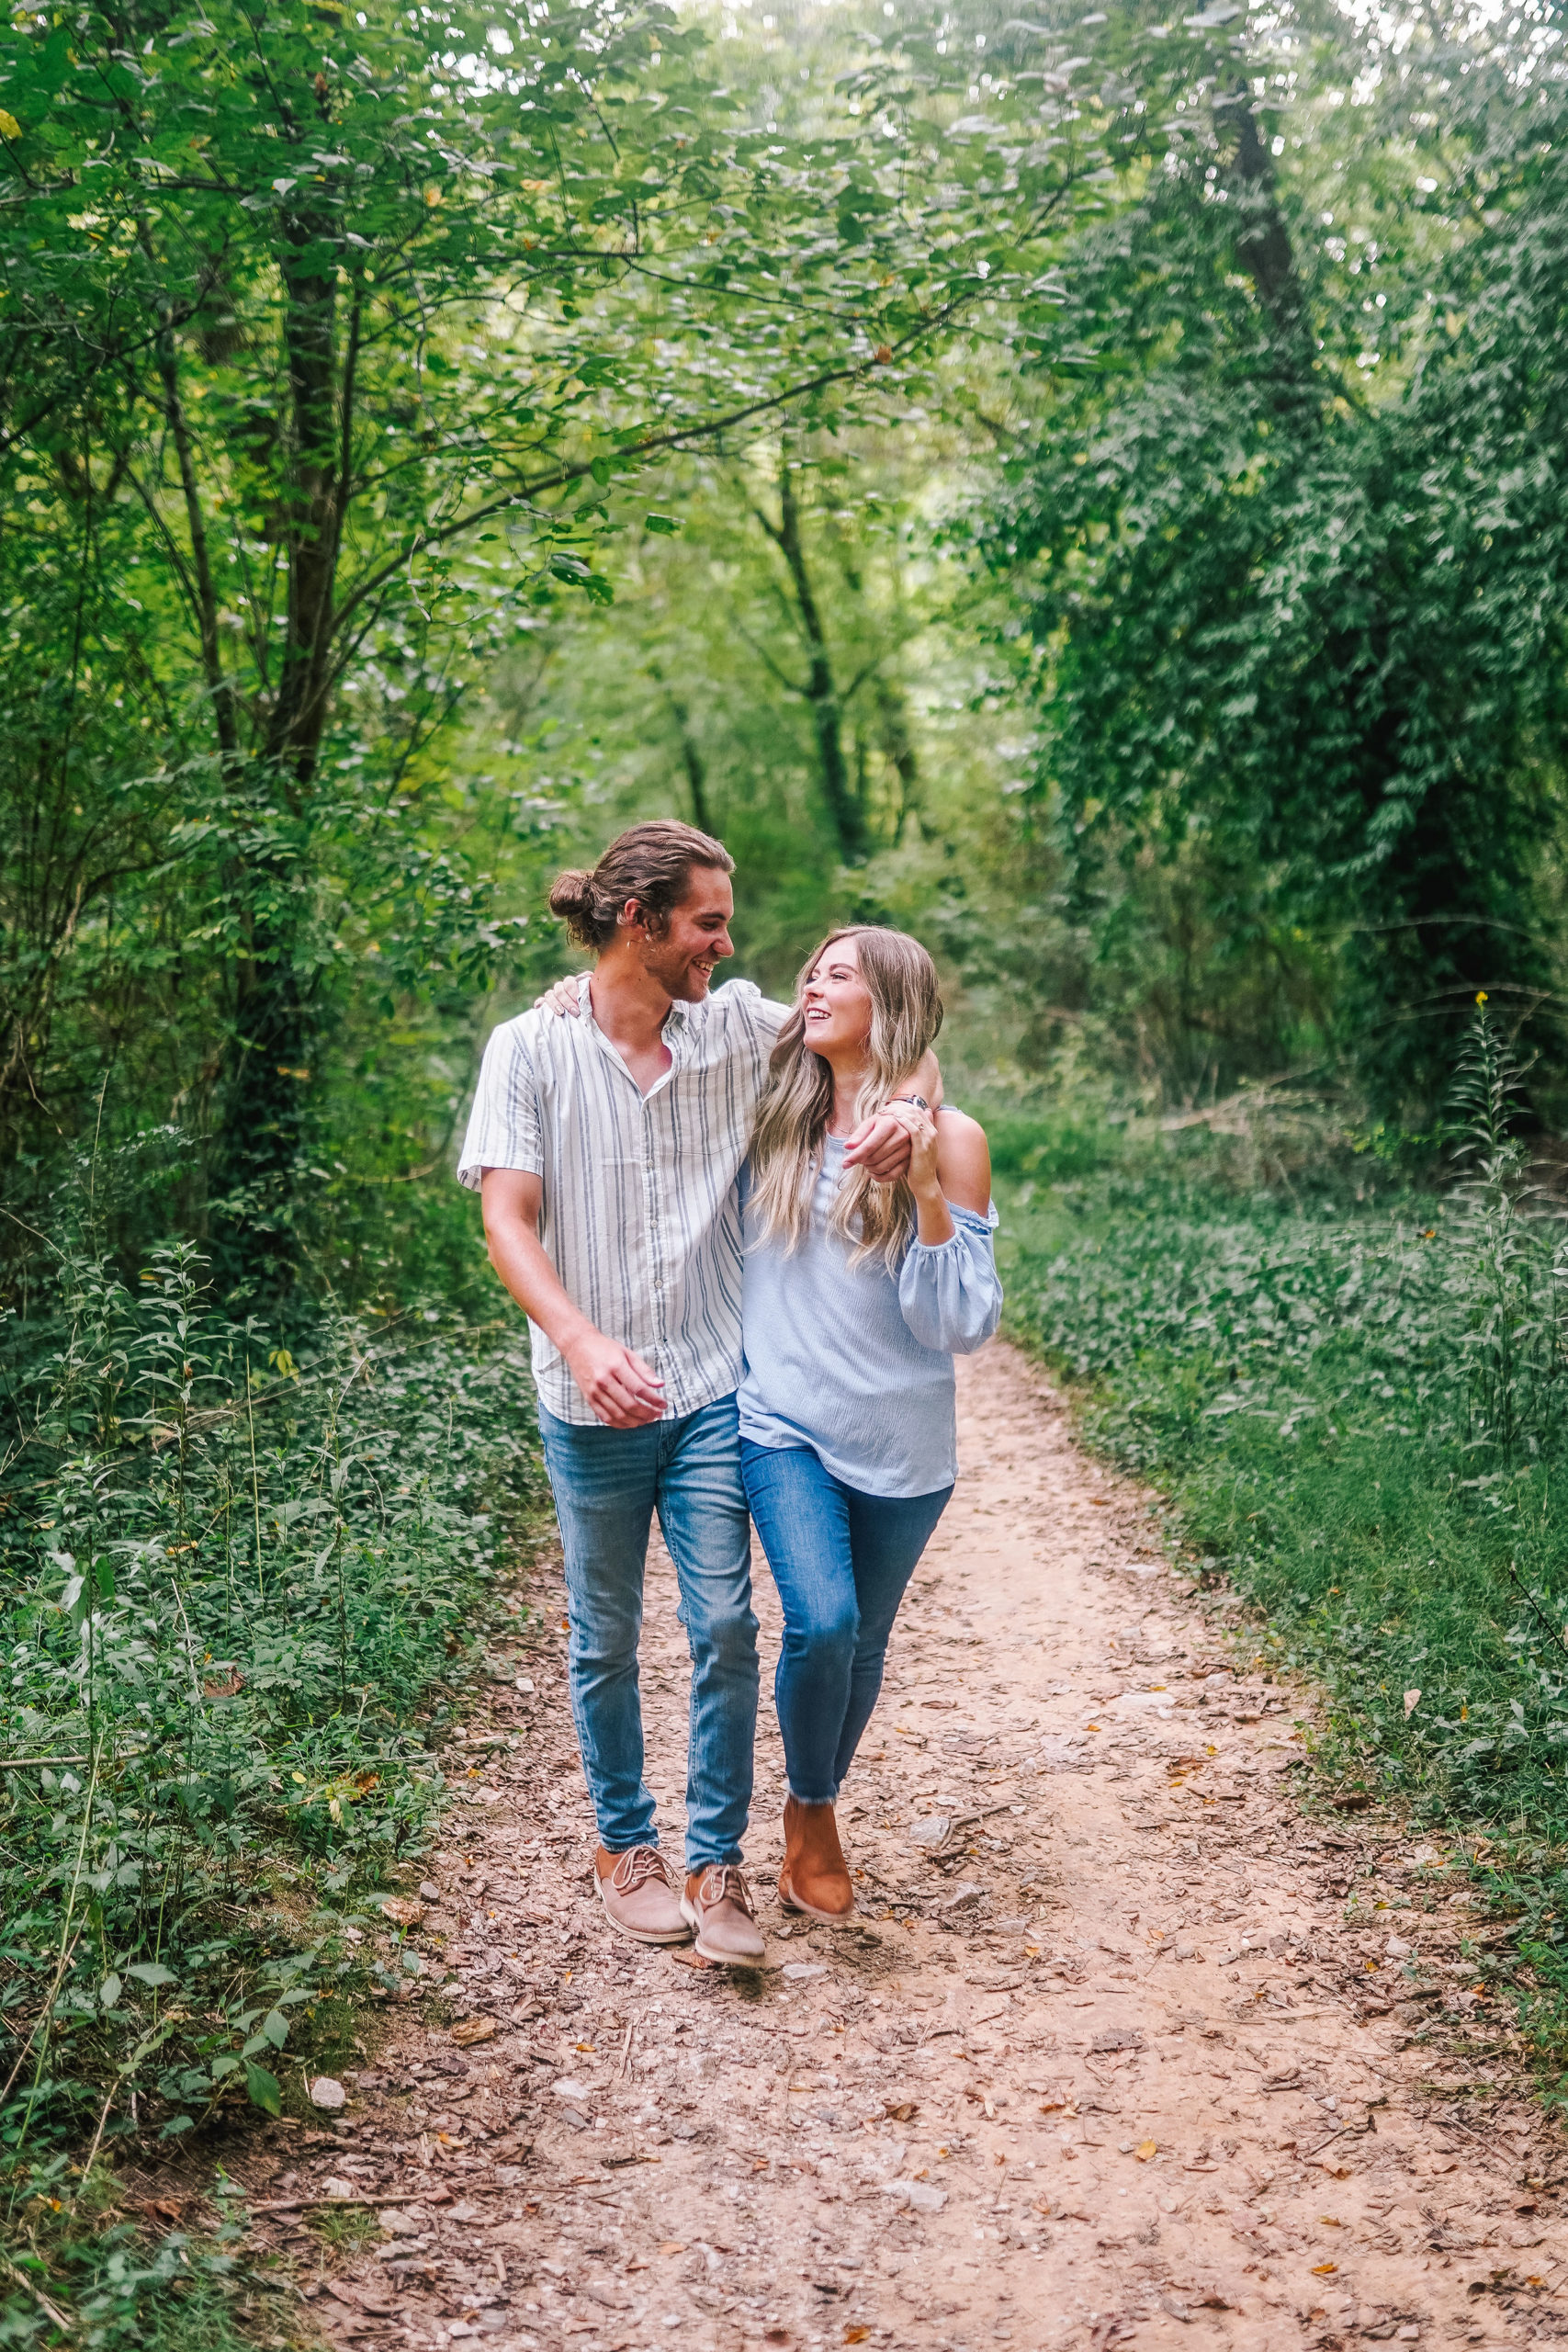 smoky mountain engagement photos. Couple walking through the gorgeous lush forest on a dirt trail.